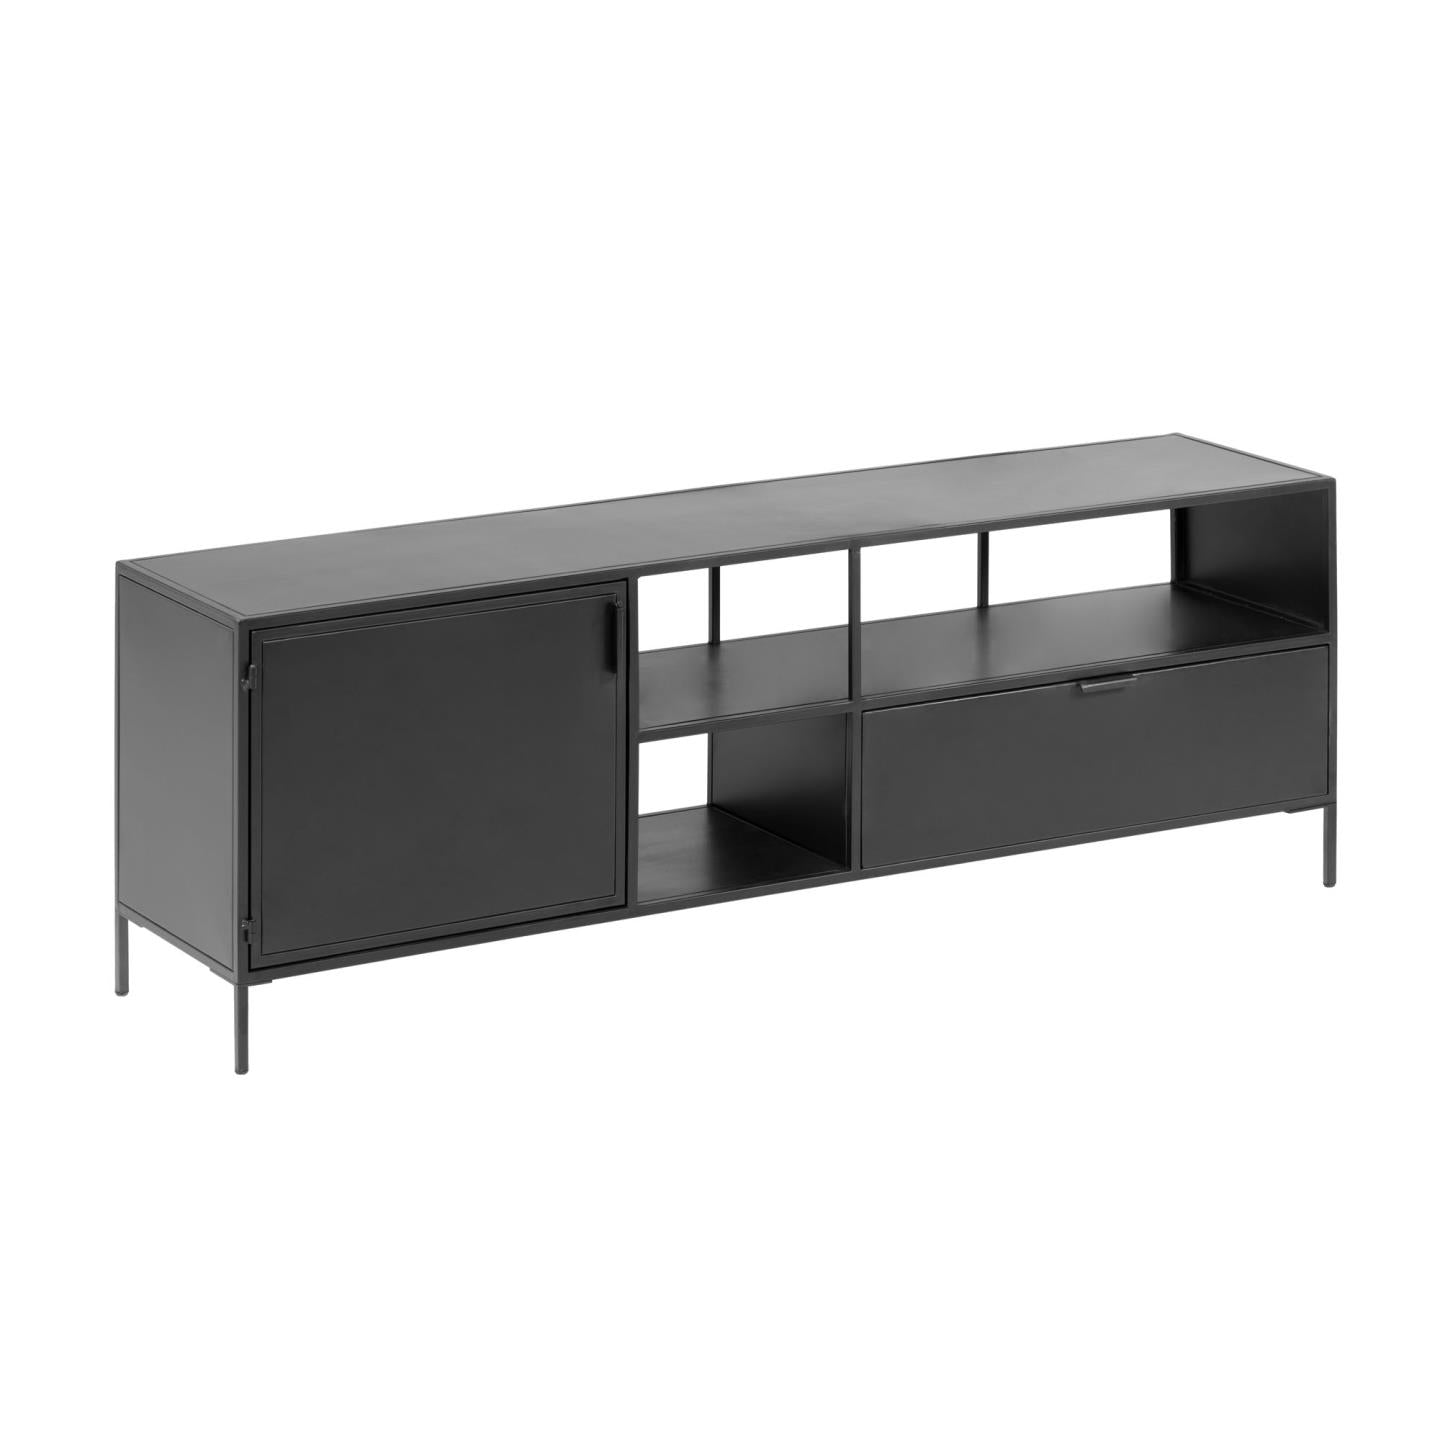 Shantay metal TV stand in a painted black finish with 1 door and drawer, 150 x 50 cm